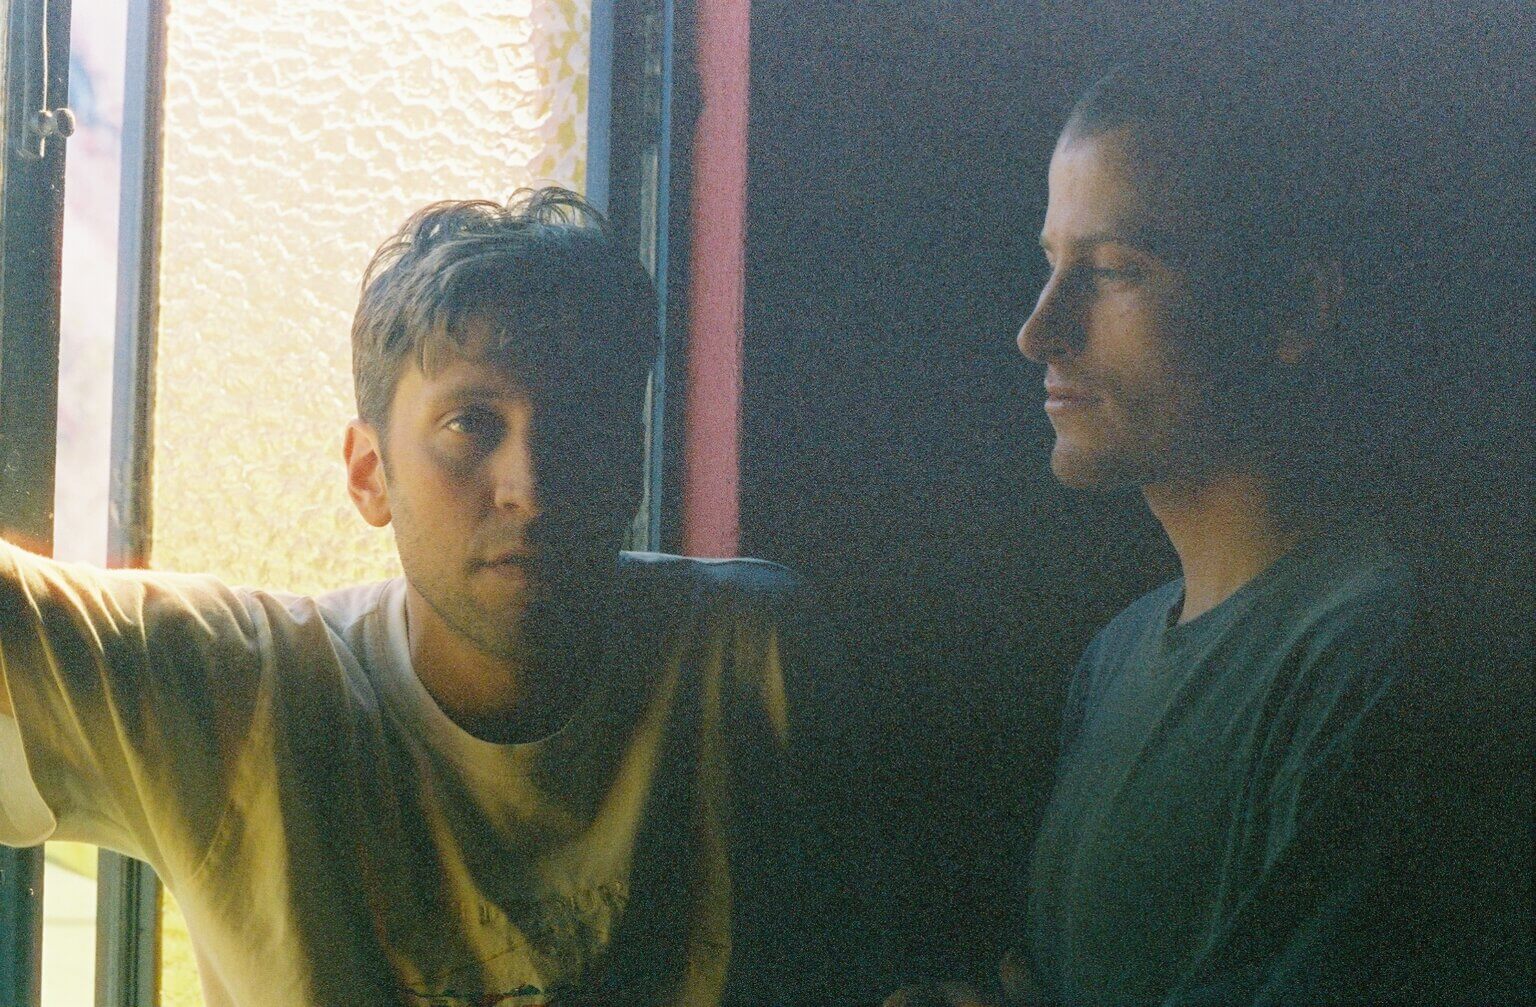 Hovvdy, recently announced their EP billboard for my feelings, which includes songs that were mostly written during their True Love sessions